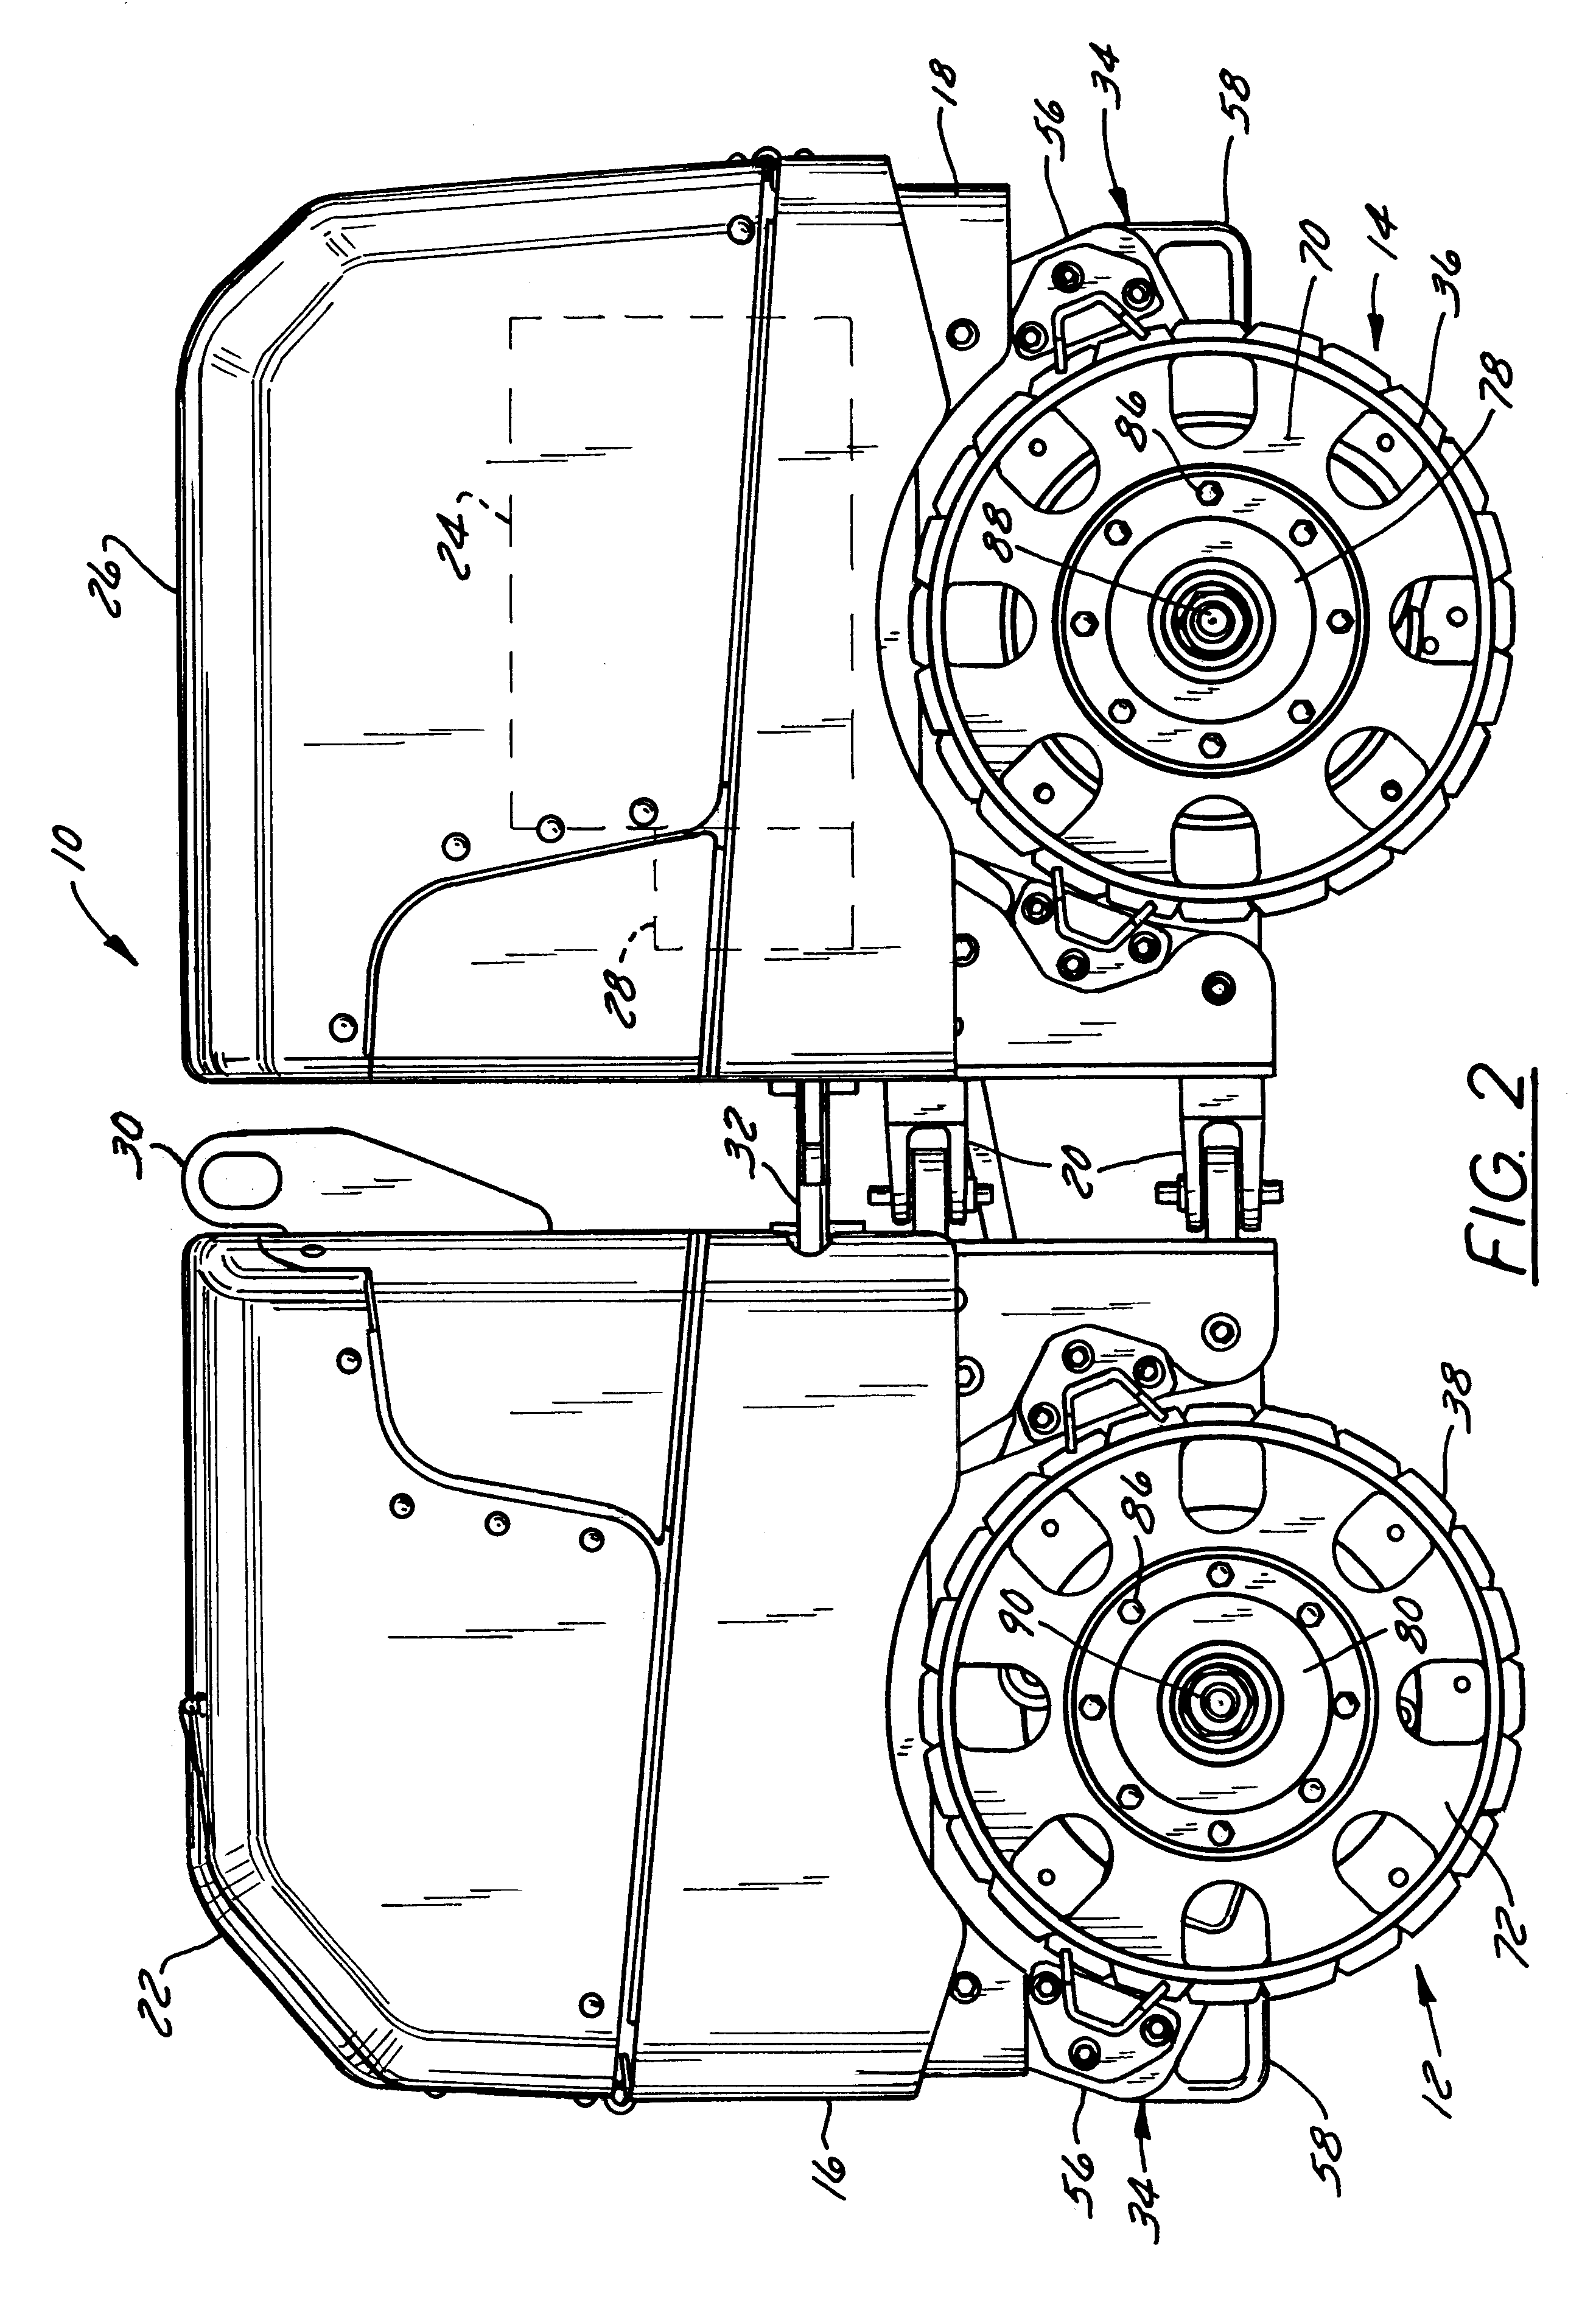 Vibratory compactor and compact exciter assembly usable therewith